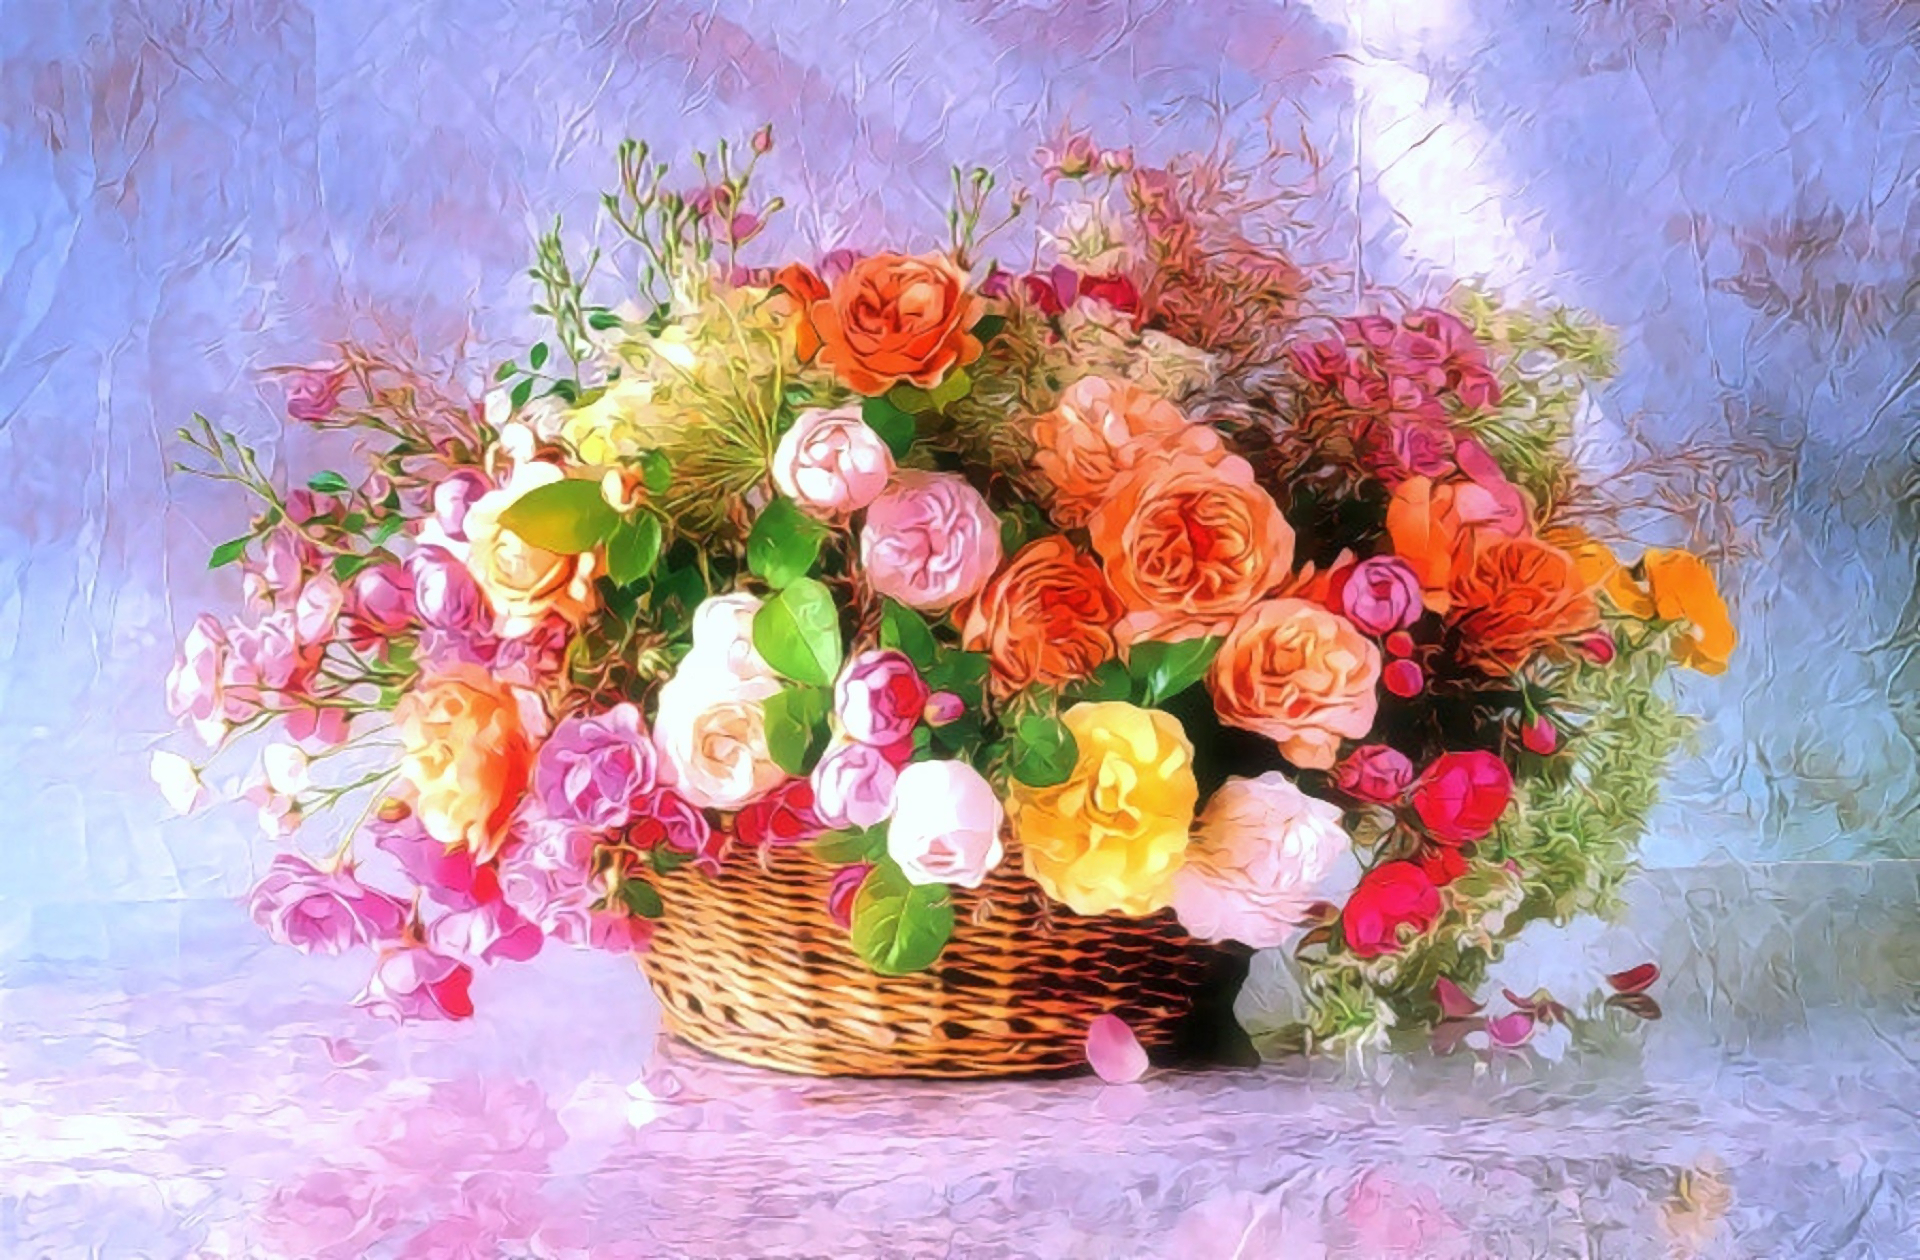 artistic, flower, basket, colorful, colors, painting, flowers